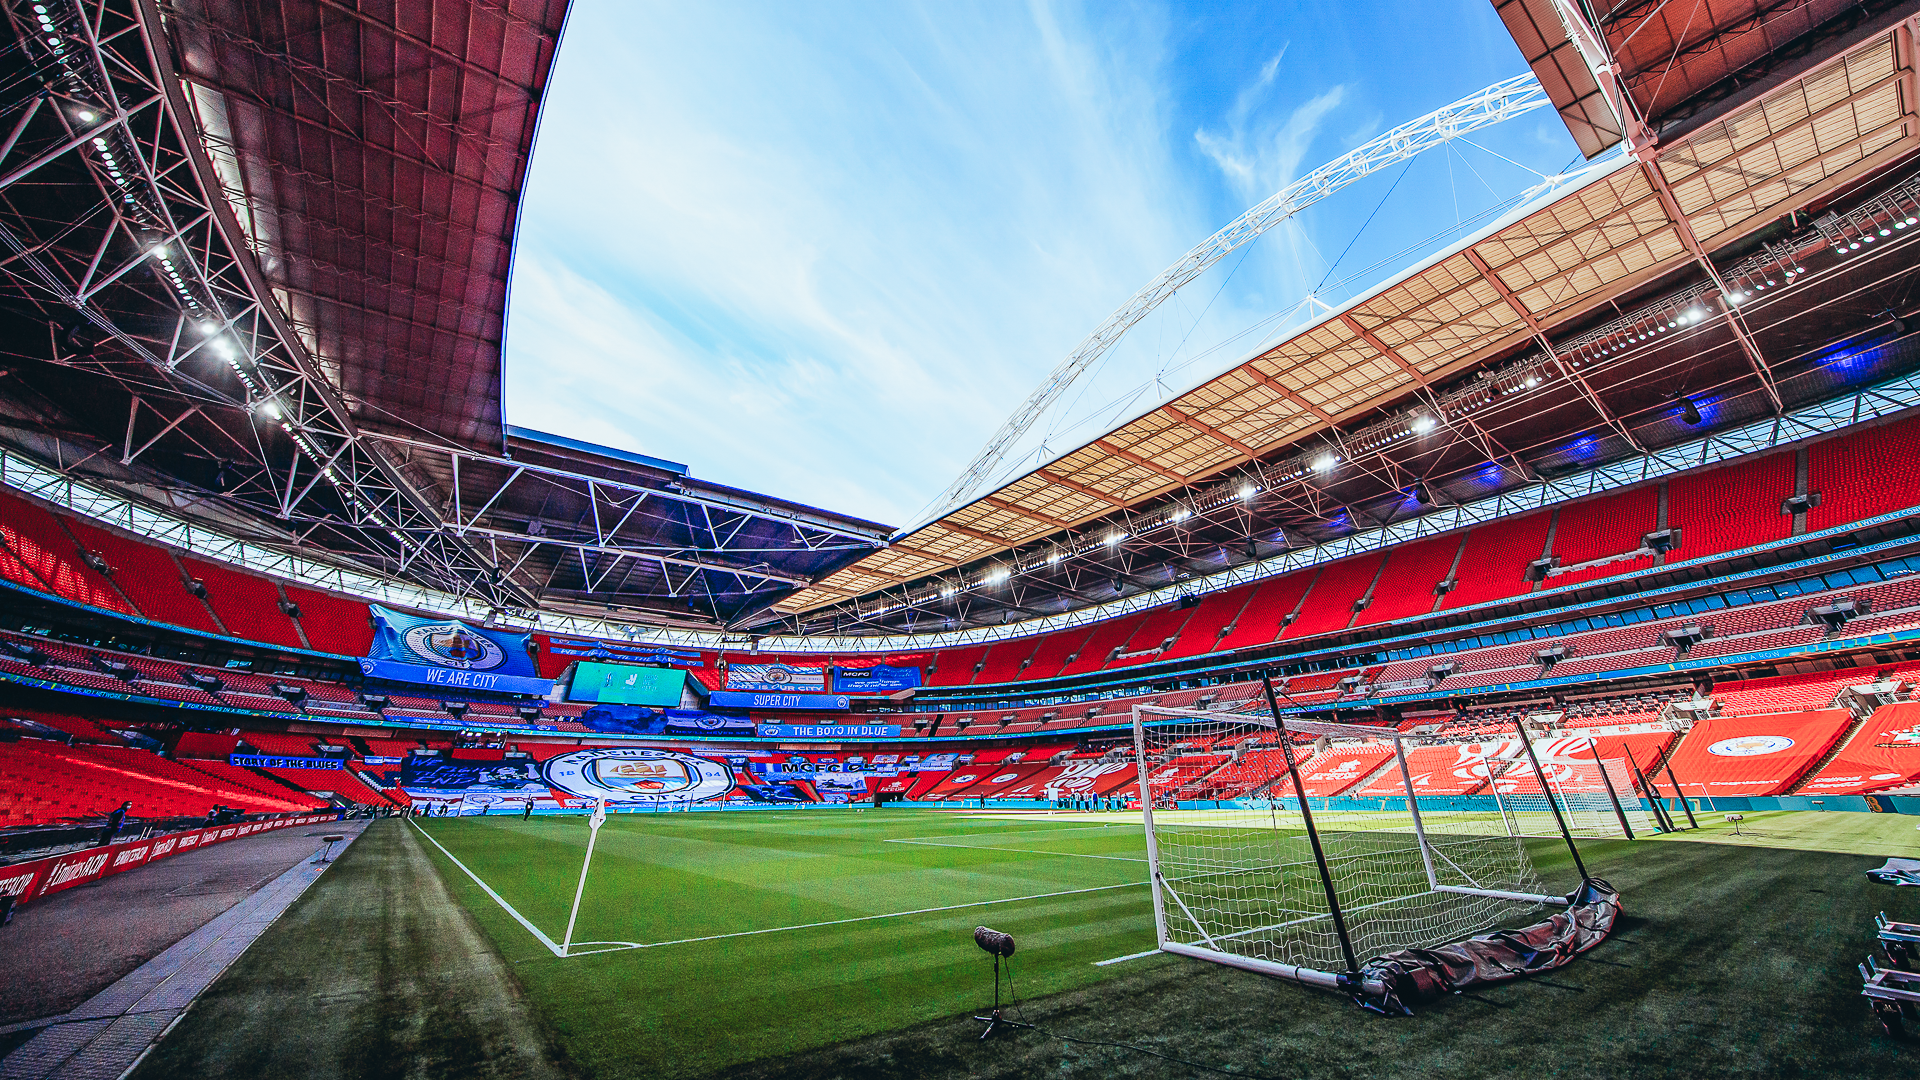 FA Community Shield Date, kick-off time and TV coverage confirmed